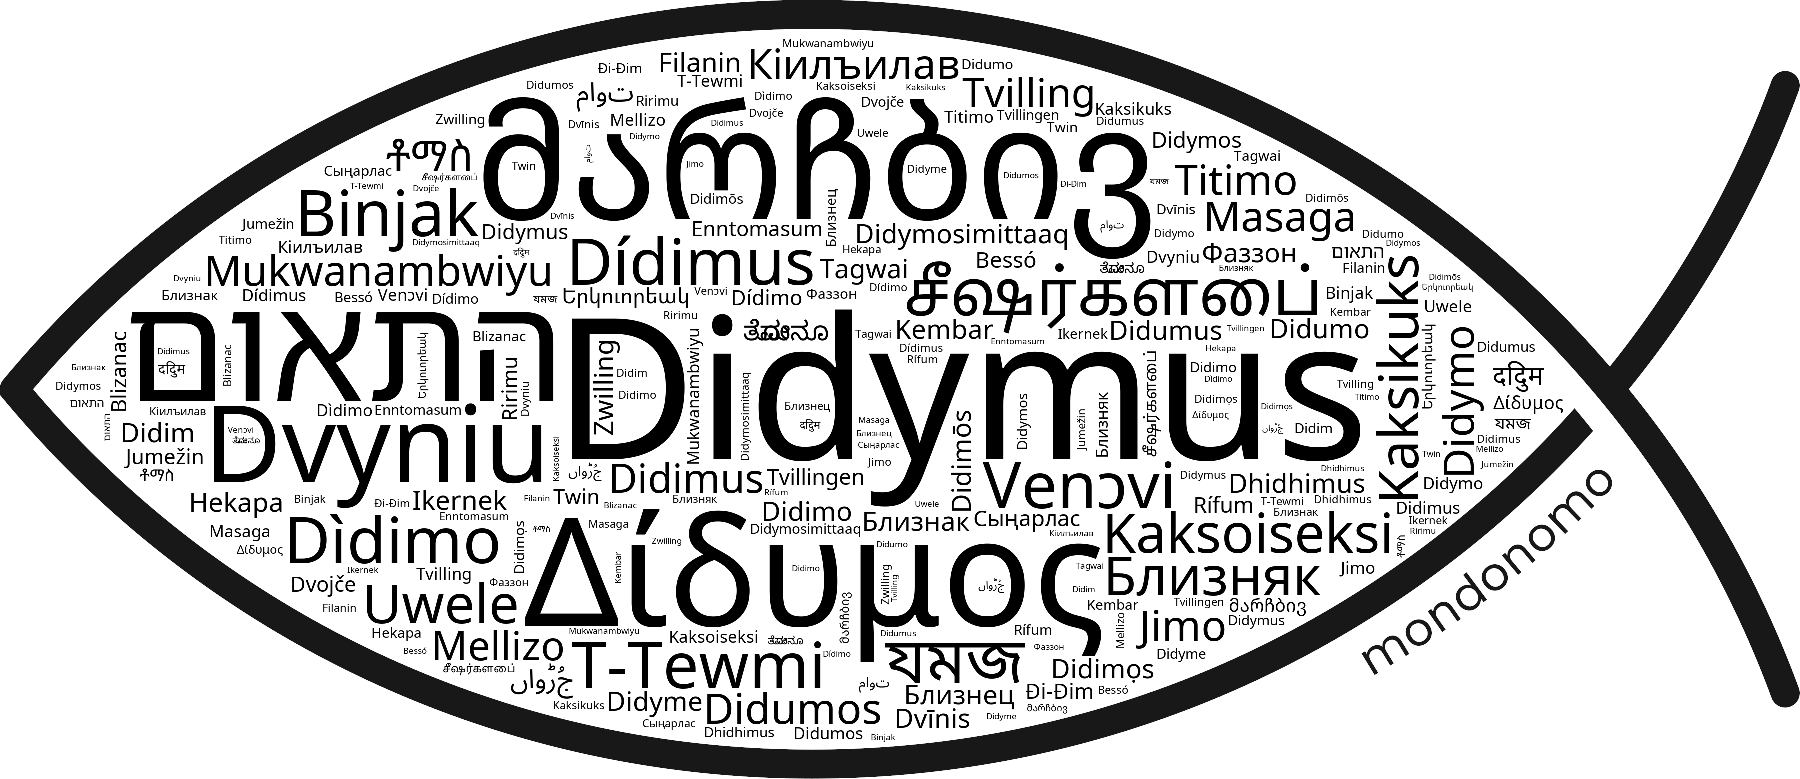 Name Didymus in the world's Bibles